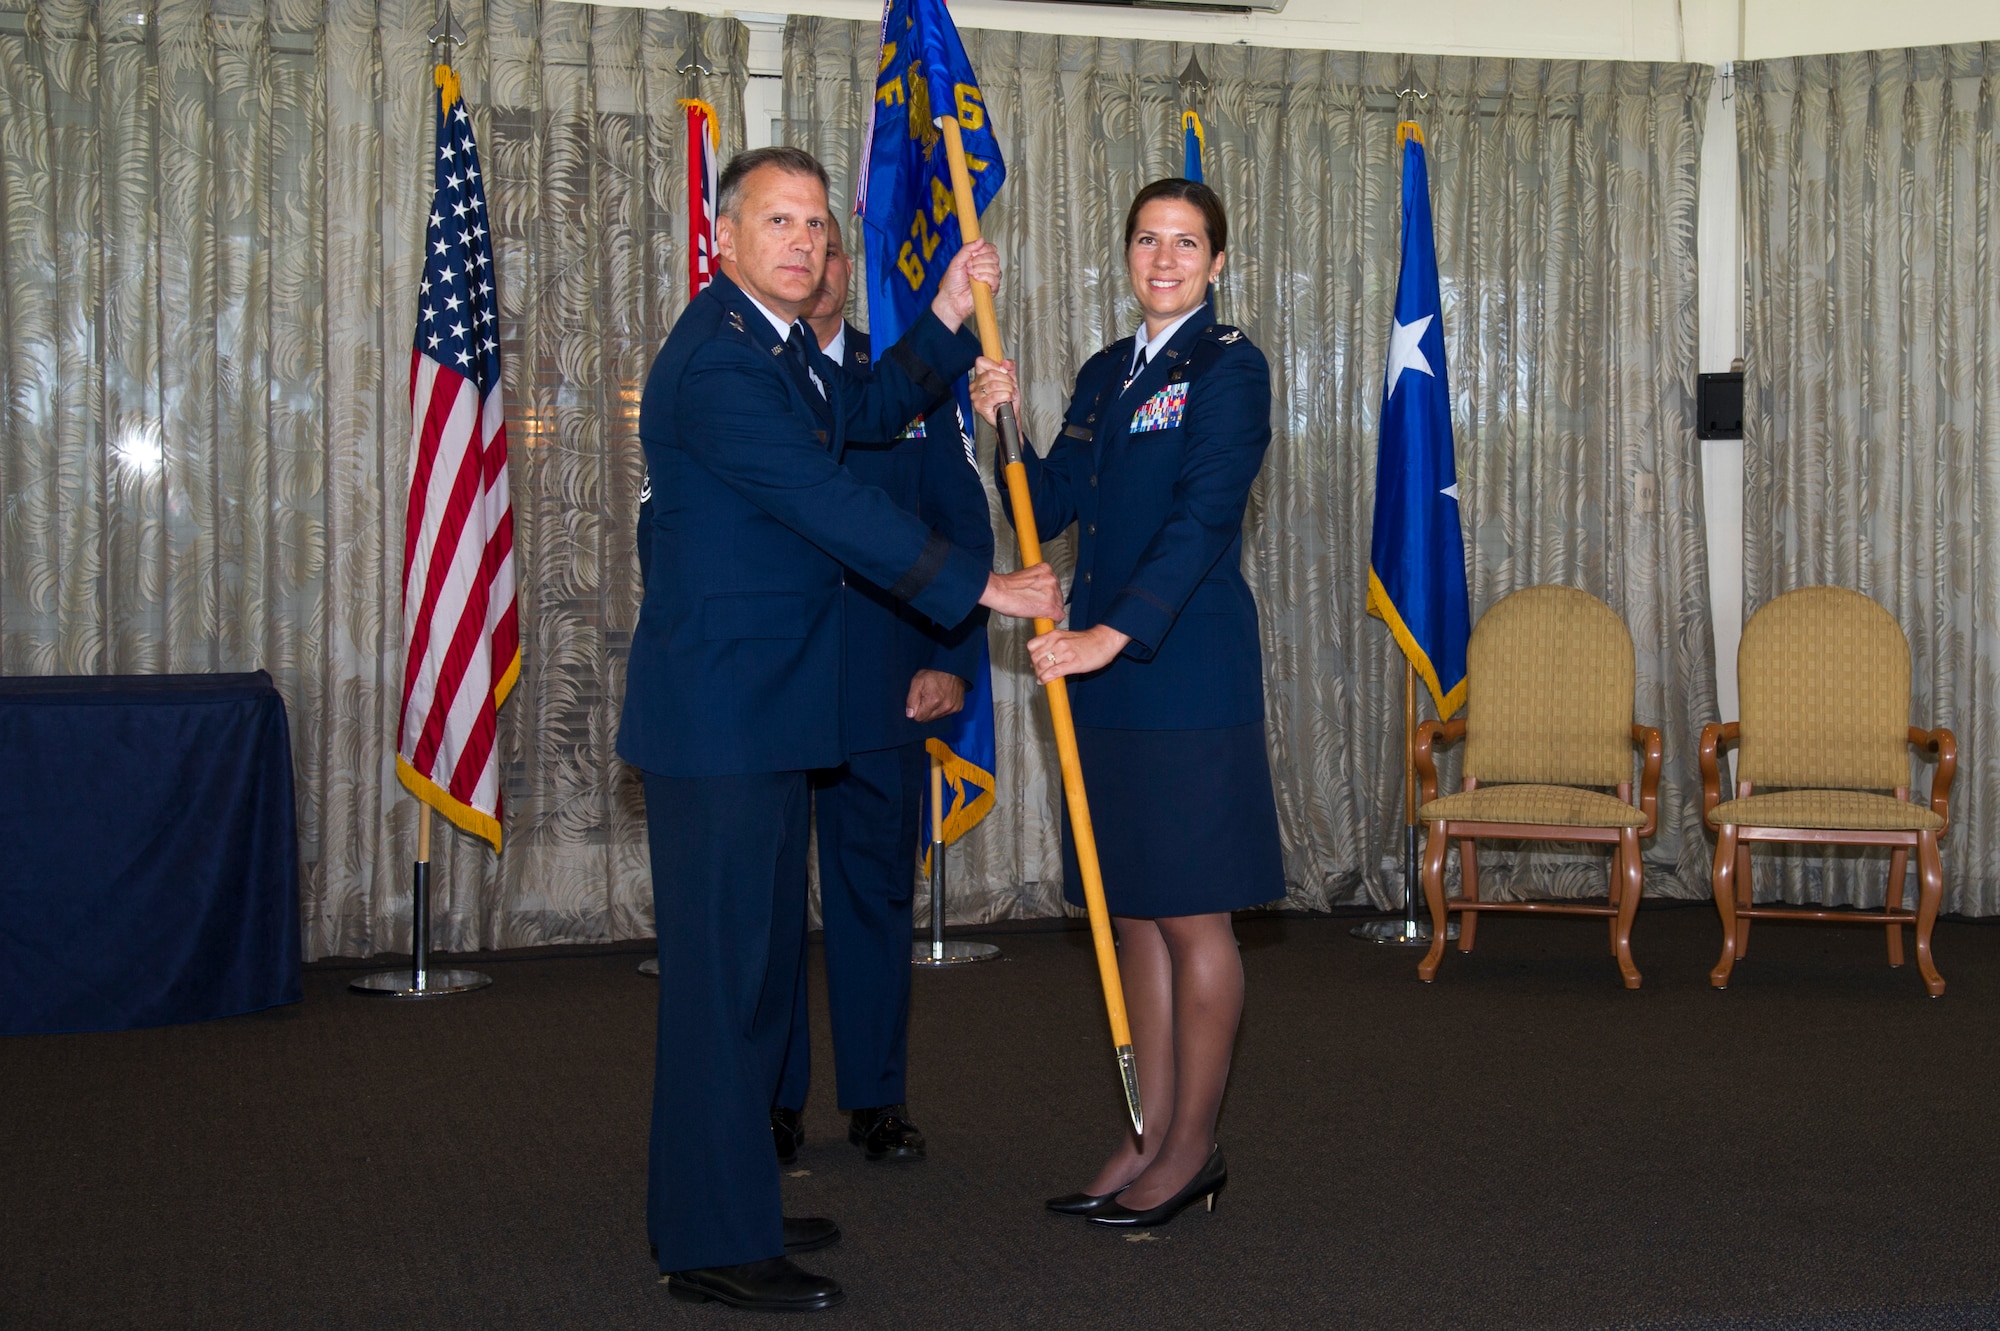 U.S. Air Force Maj. Gen. Randall Ogden, 4th Air Force commander, gives Col. Athanasia Shinas command of the 624th Regional Support Group during an assumption of command ceremony at Joint Base Pearl Harbor-Hickam, Hawaii, July 7, 2018.